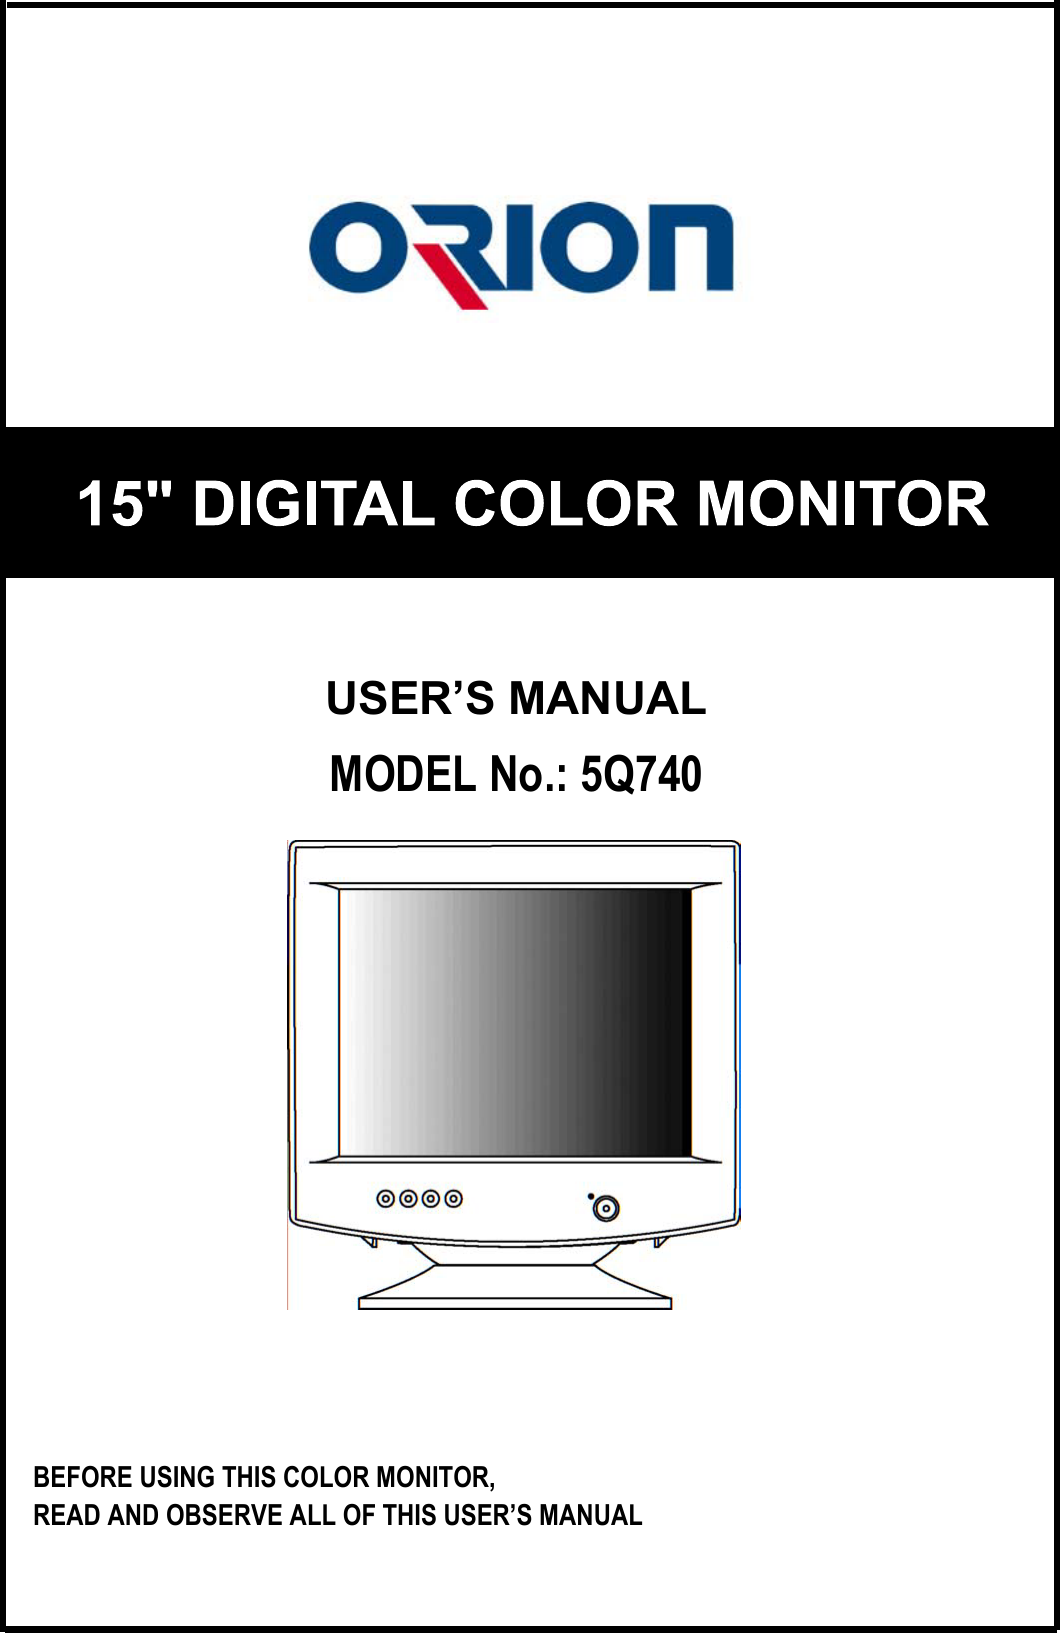 USER’S MANUALMODEL No.: 5Q740BEFORE USING THIS COLOR MONITOR,READ AND OBSERVE ALL OF THIS USER’S MANUAL